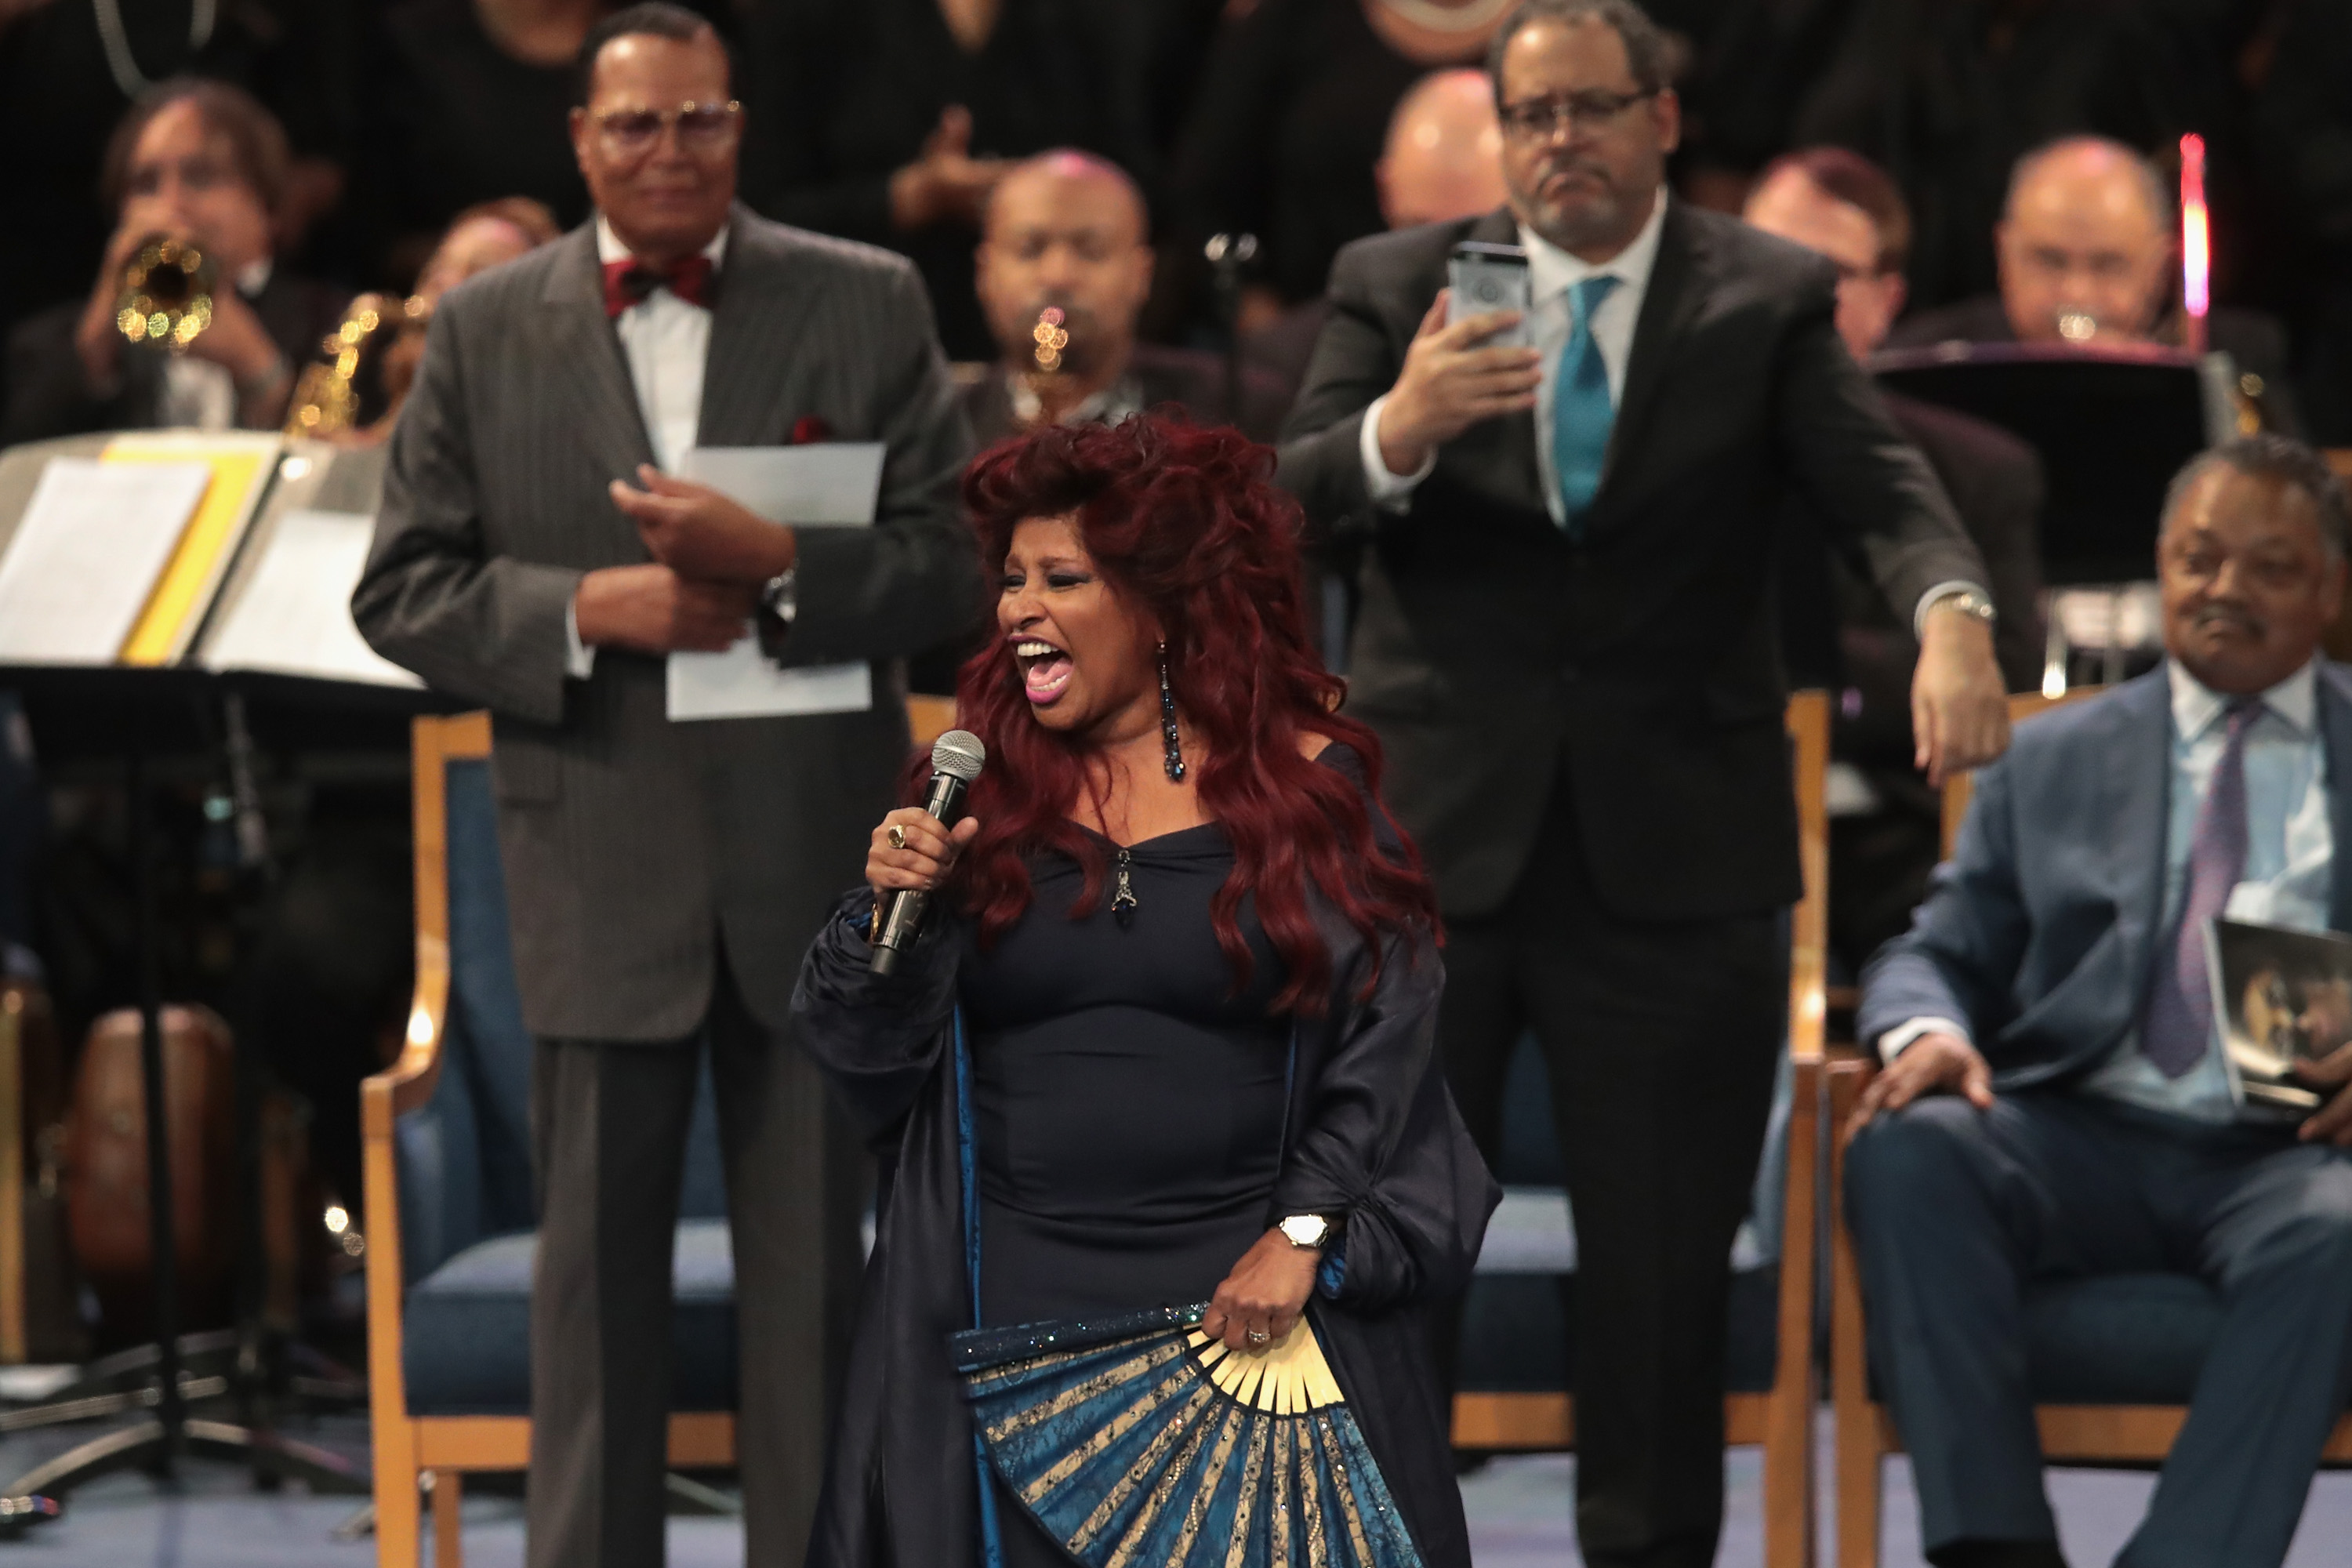 Singer Chaka Khan performs at the funeral for Aretha Franklin at the Greater Grace Temple on August 31, 2018 in Detroit, Michigan. (Scott Olson—;Getty Images)